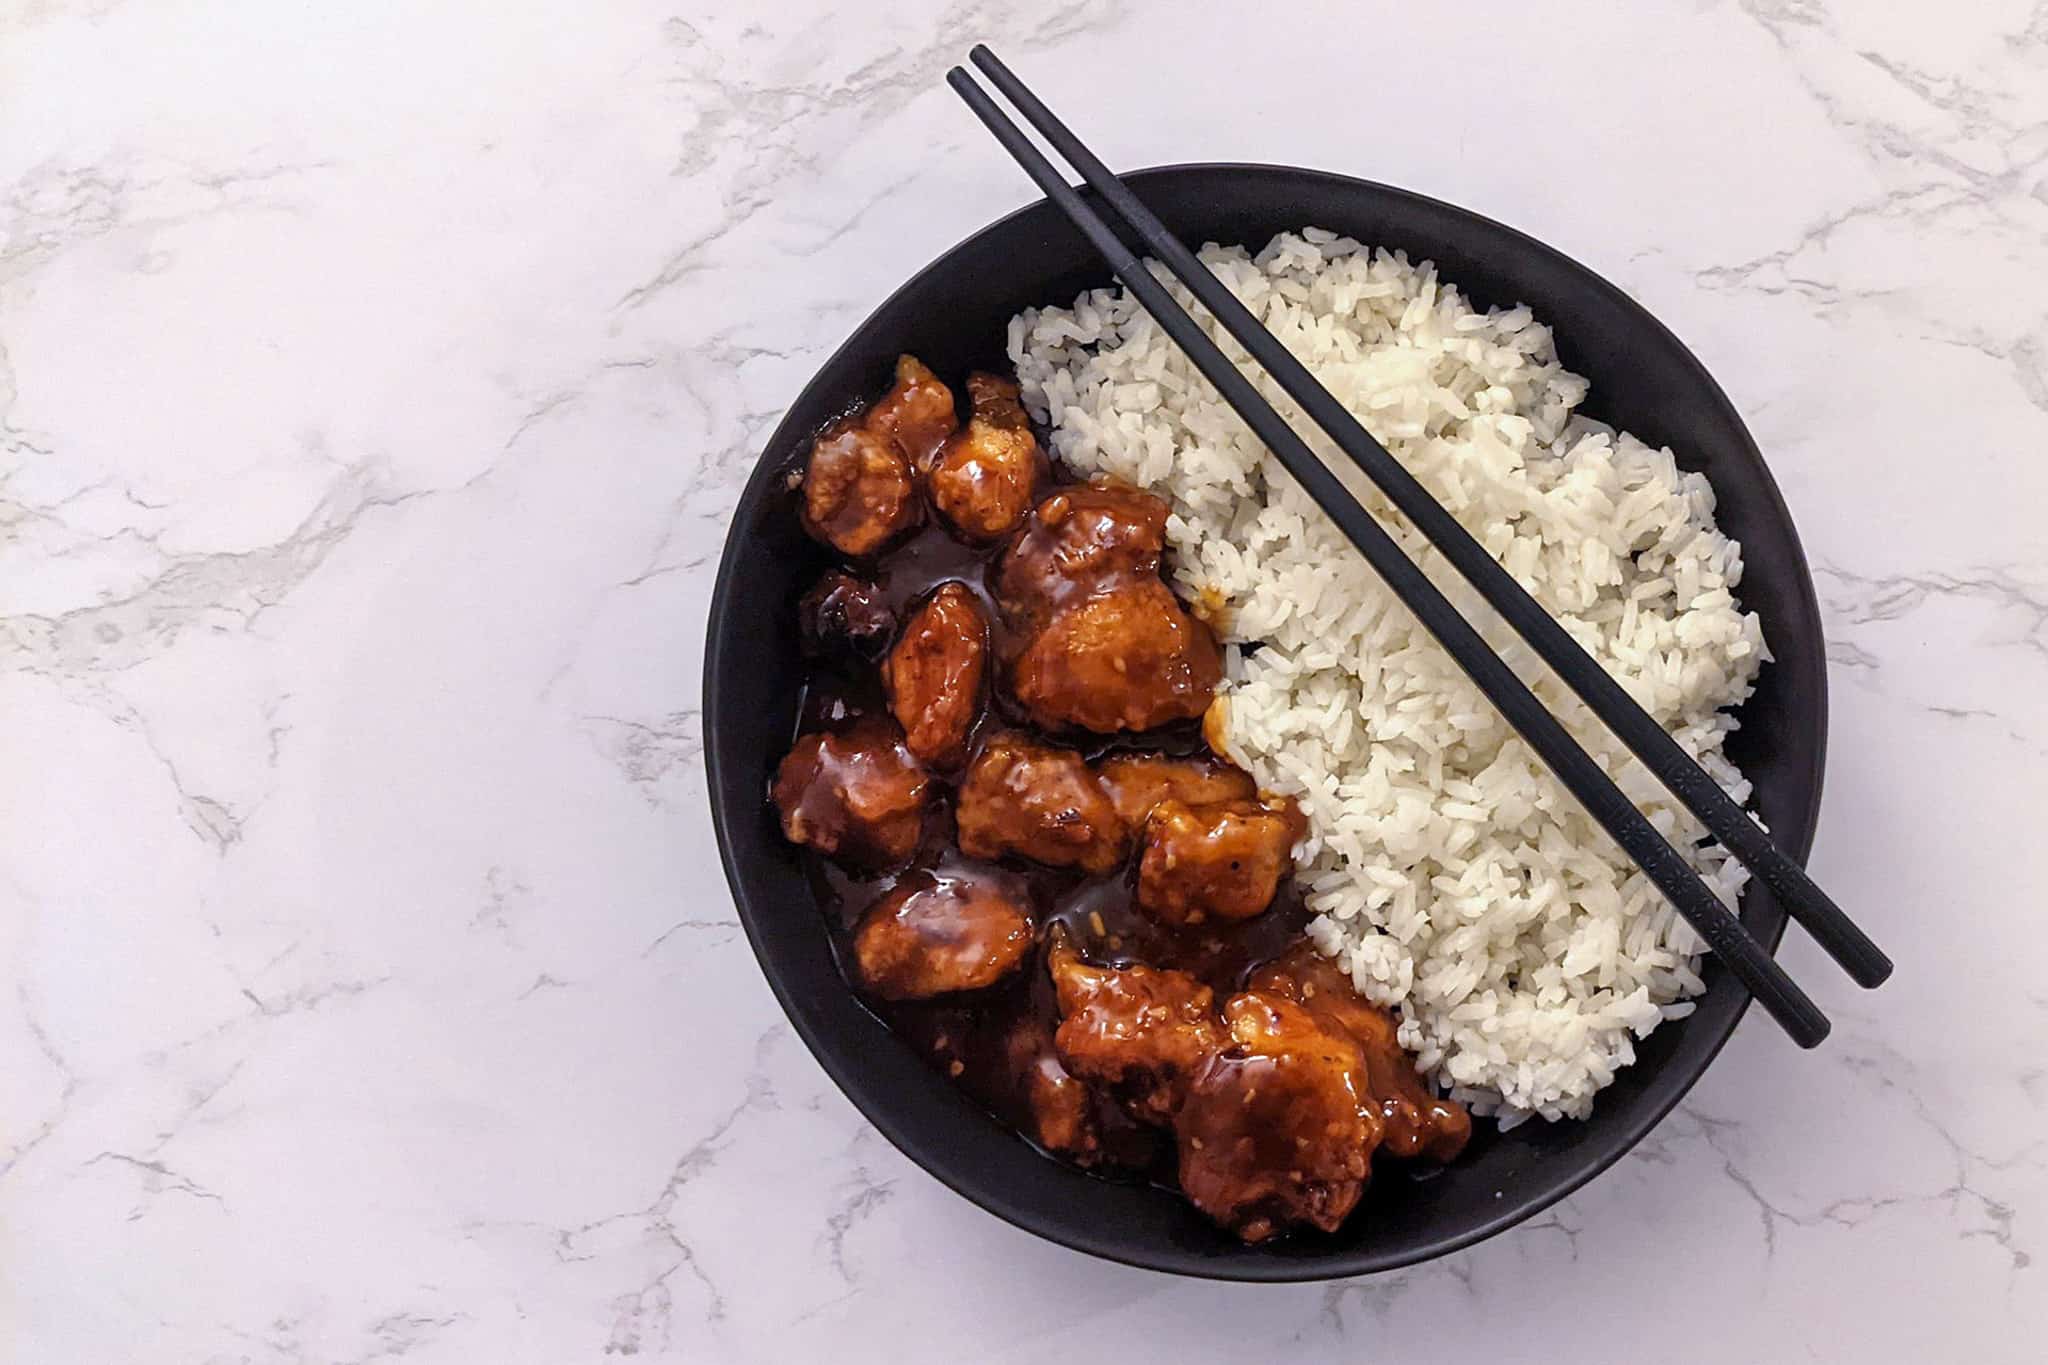 A bowl of General Tso's chicken served with white rice